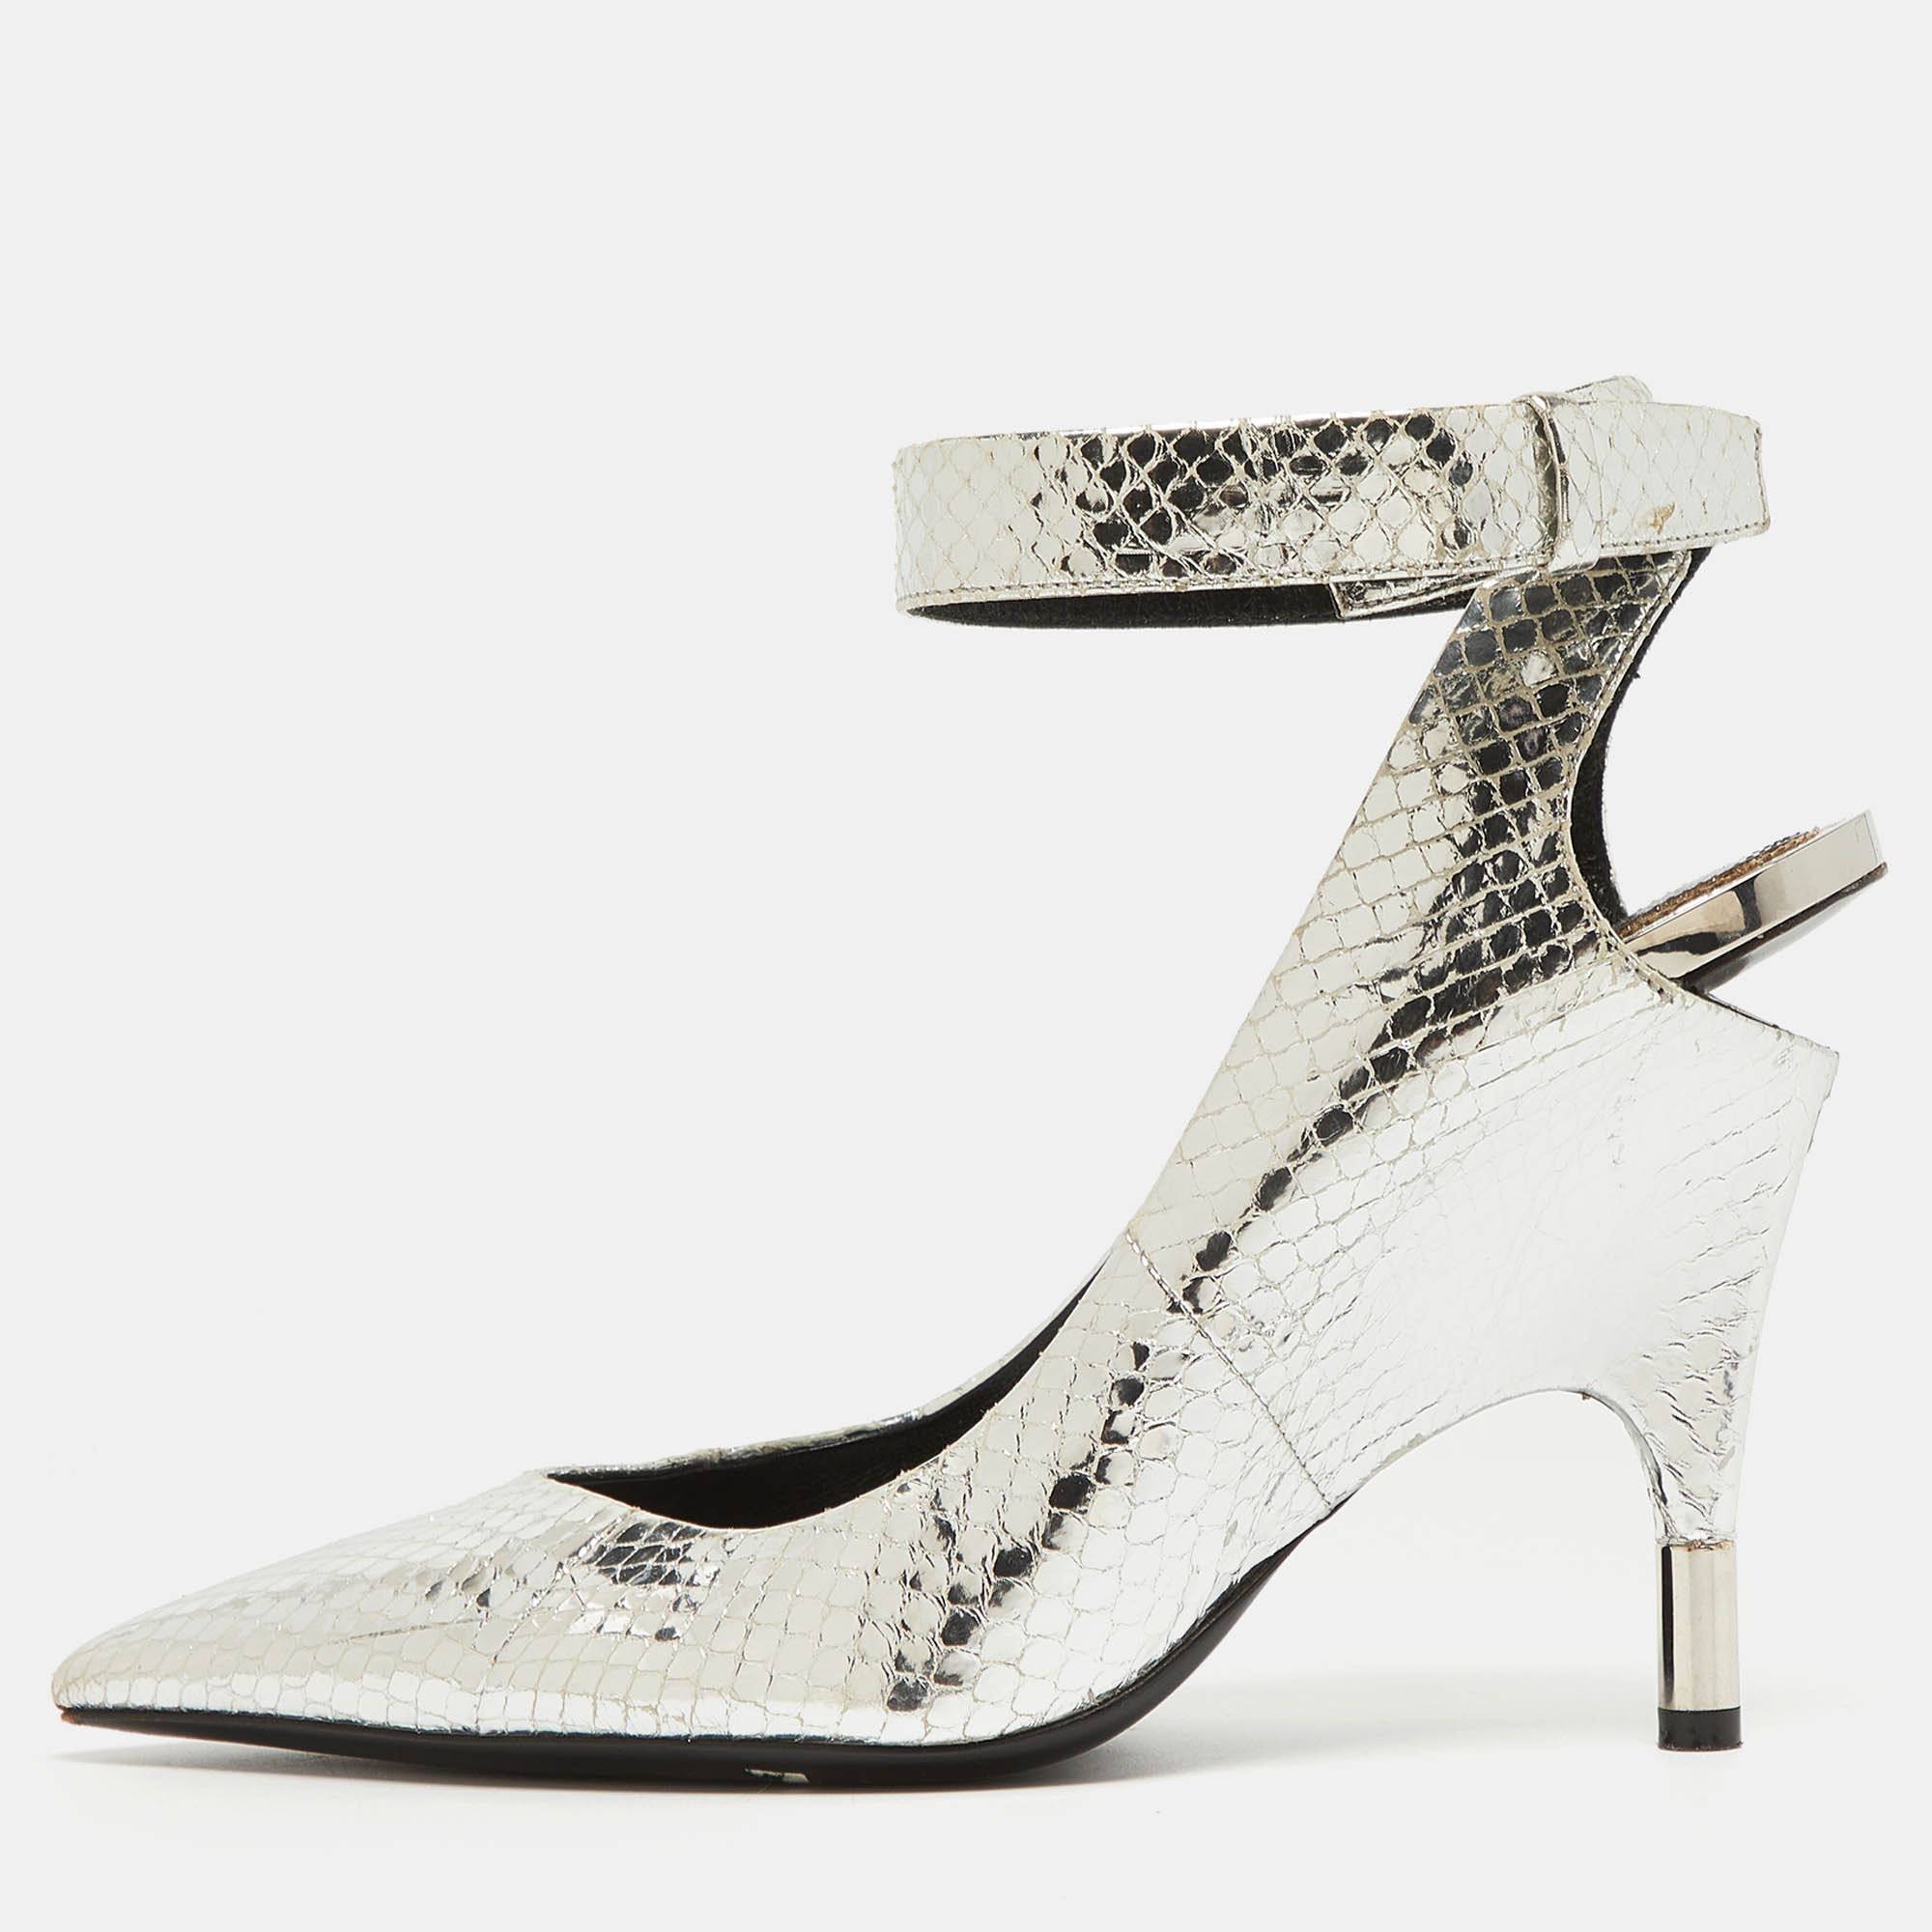 Pre-owned Tom Ford Silver Python Embossed Leather Ankle Strap Pumps Size 38